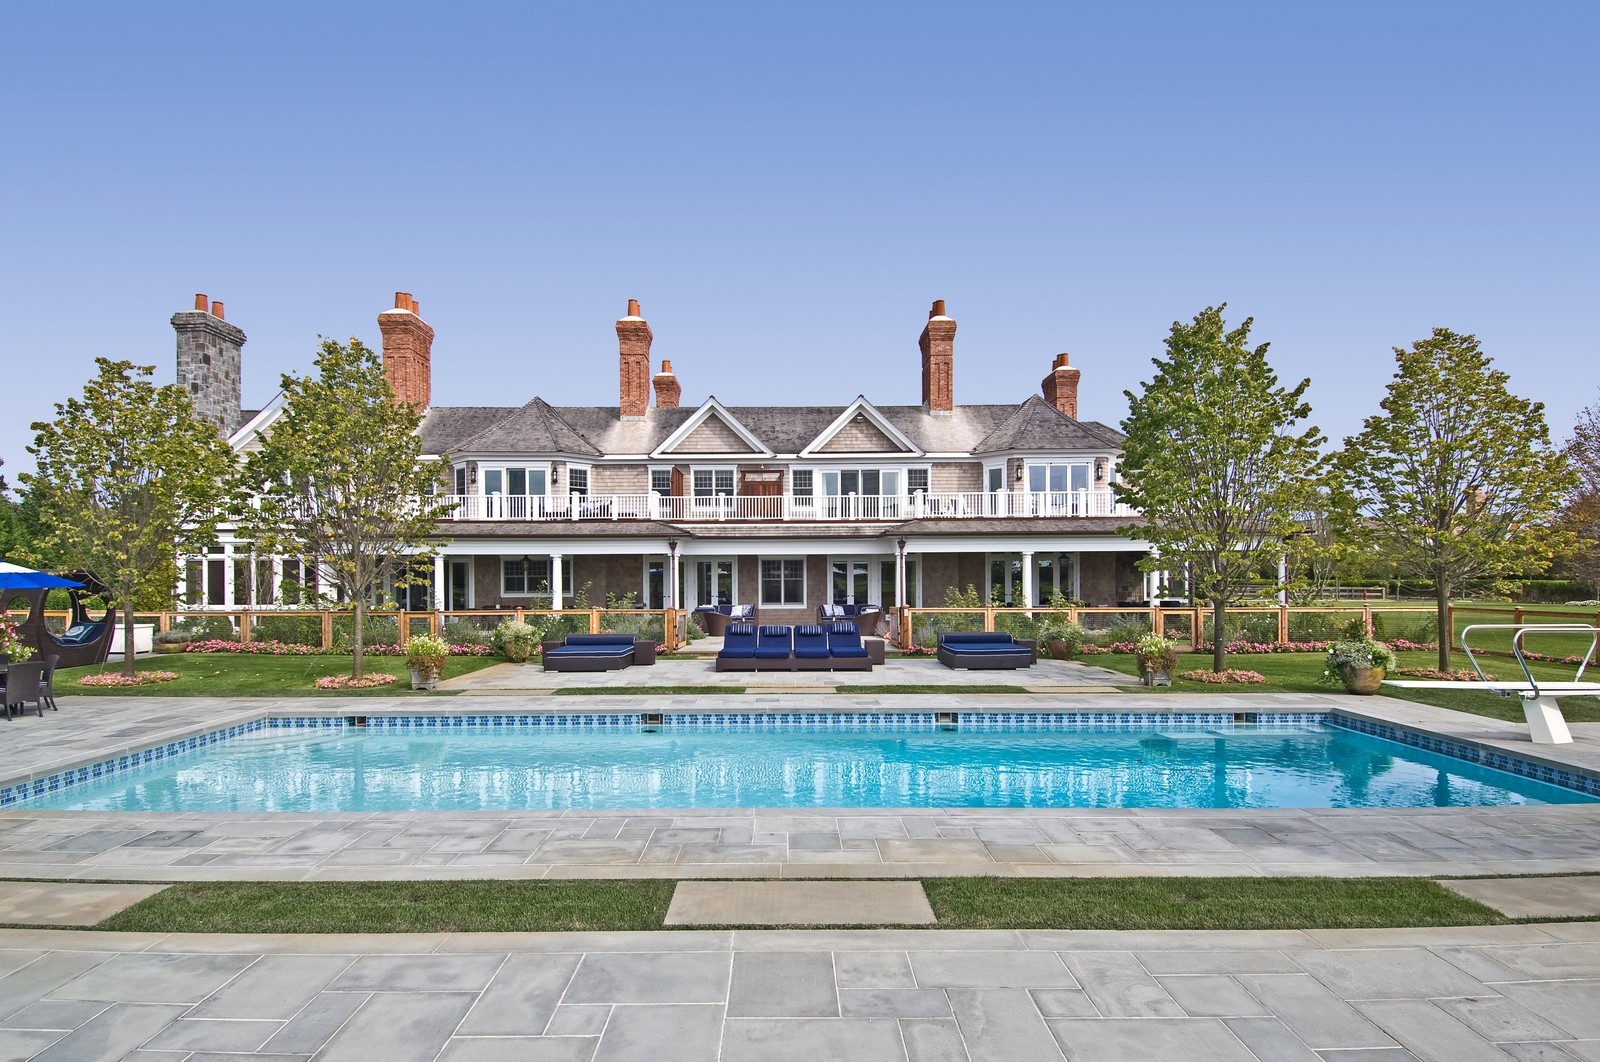 Spend July in Beyoncé and Jay-Z’s Decked-Out Former Hamptons Mansion for $1M